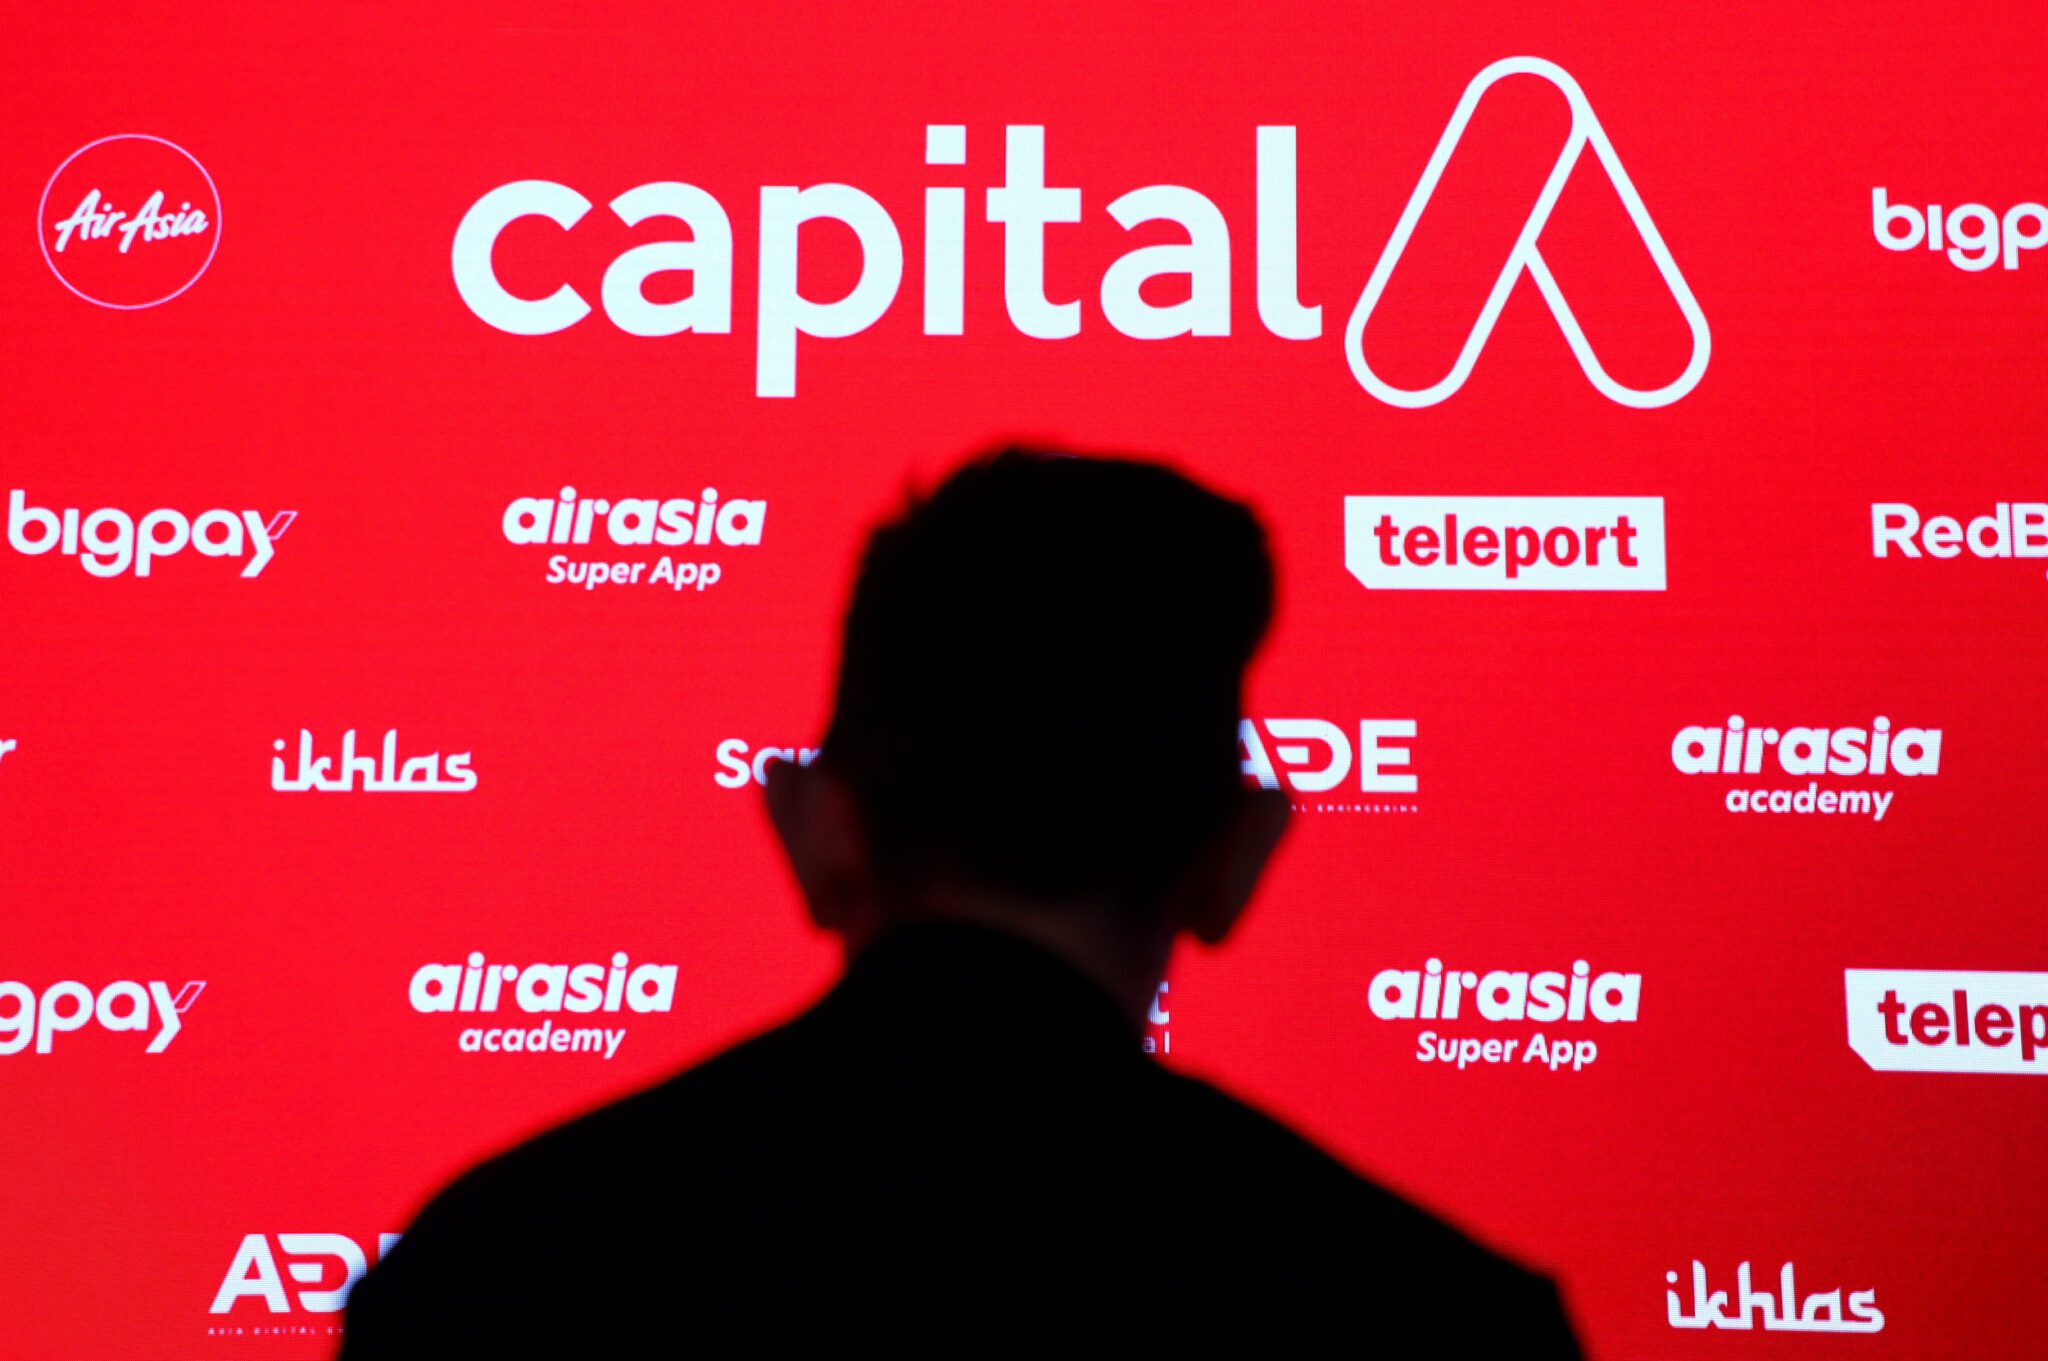 AirAsia changes name to Capital A as it grows beyond an airline. 